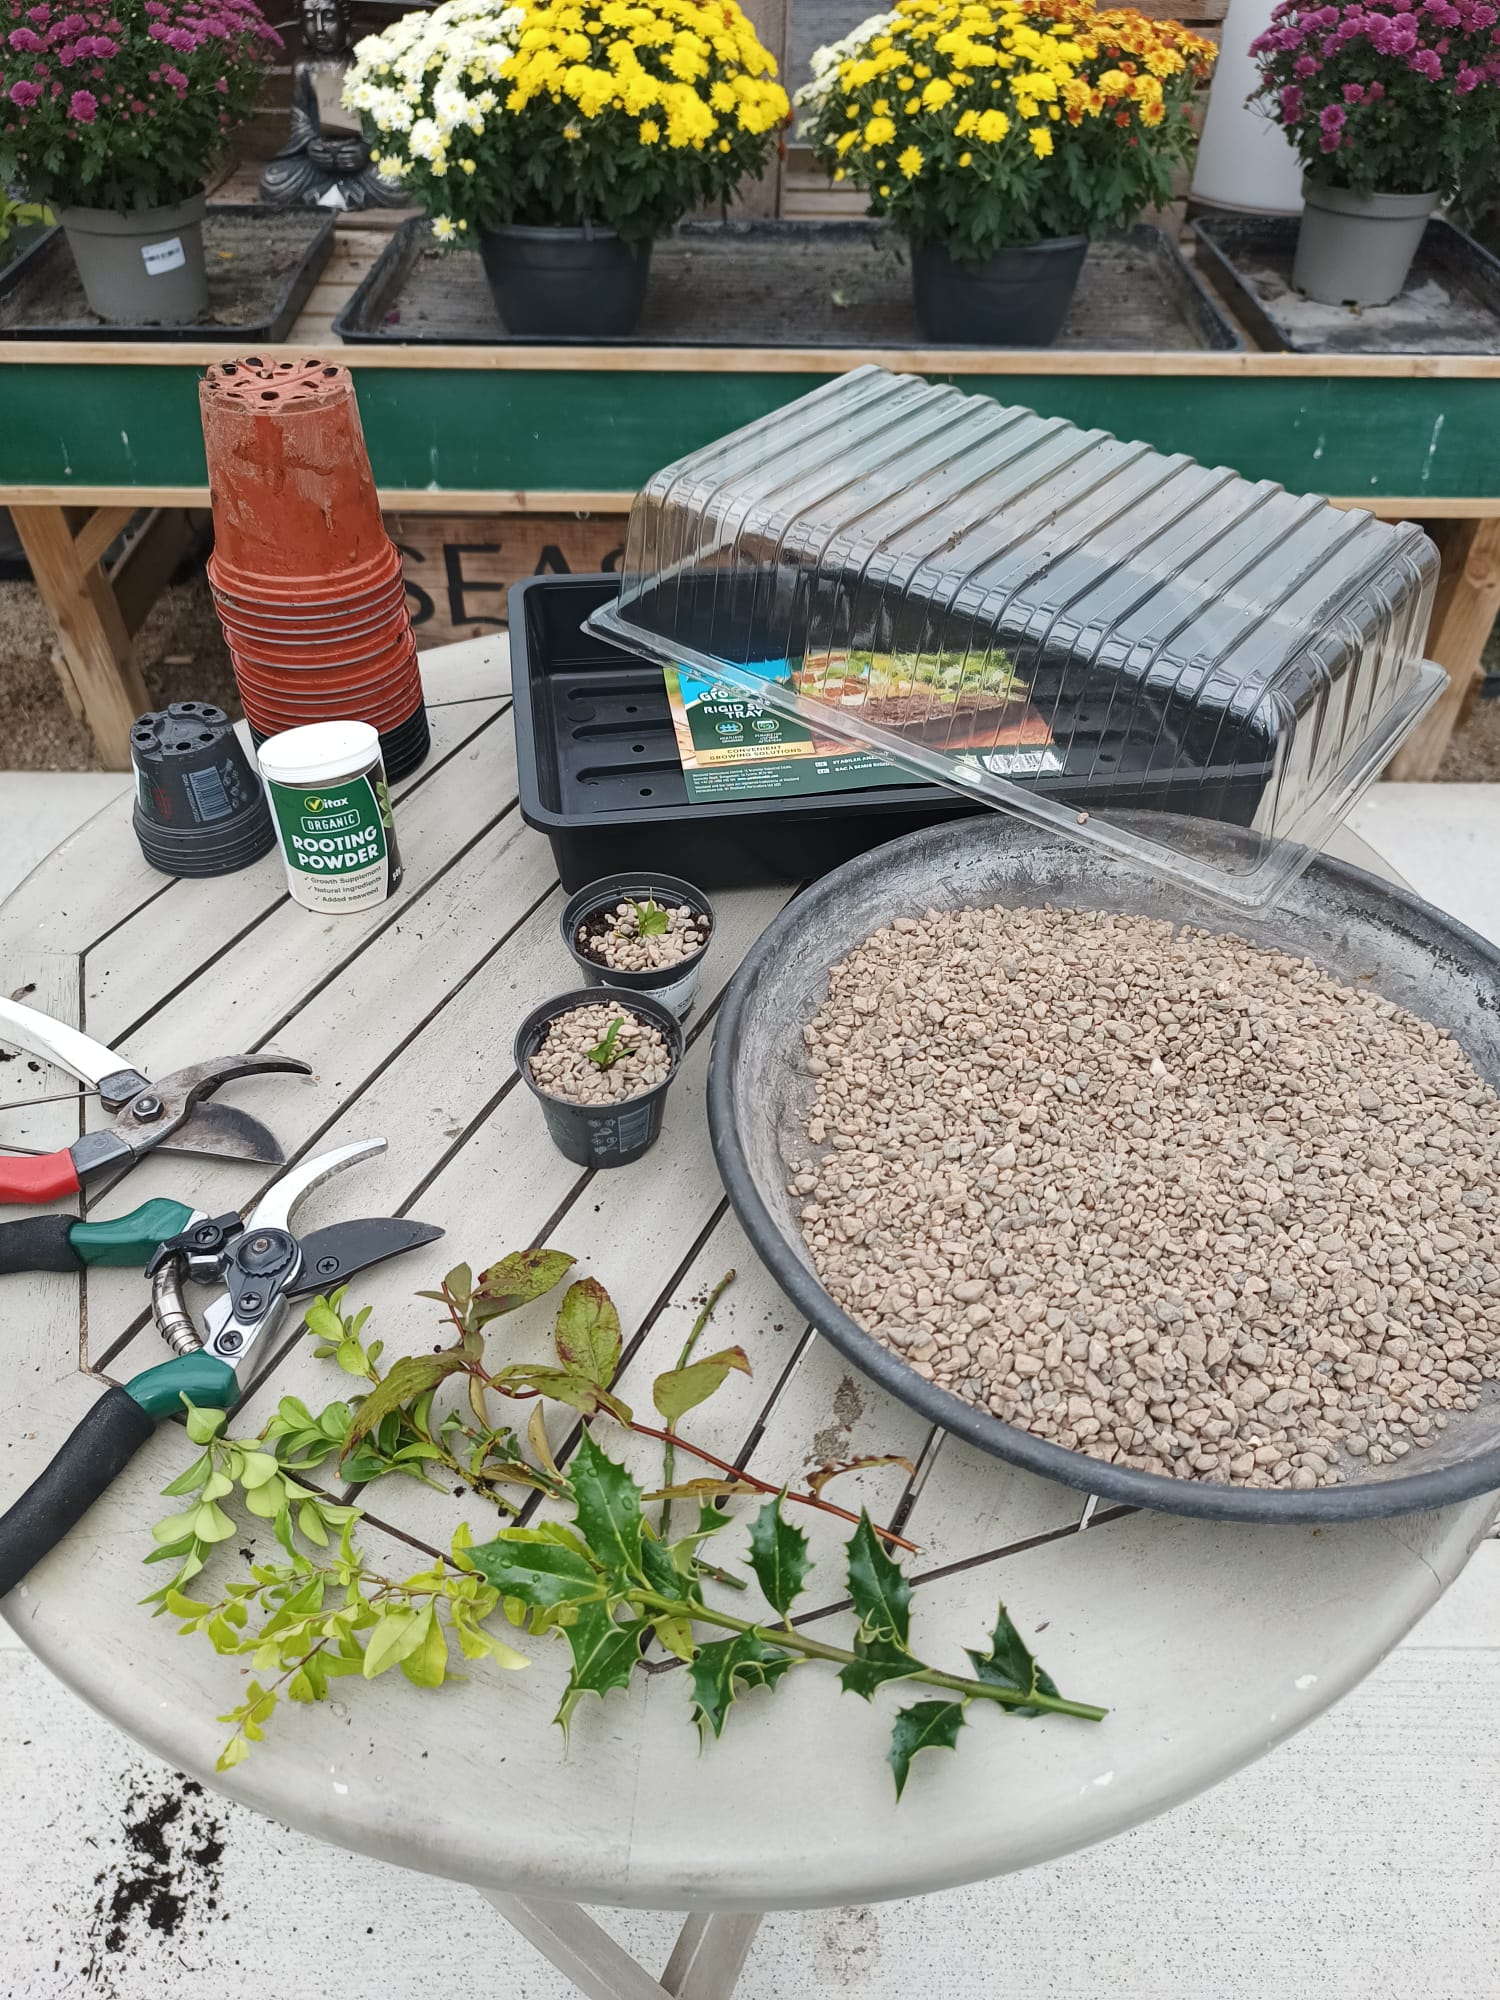 SOLAS: Great Food and Plant Propagation workshop this weekend